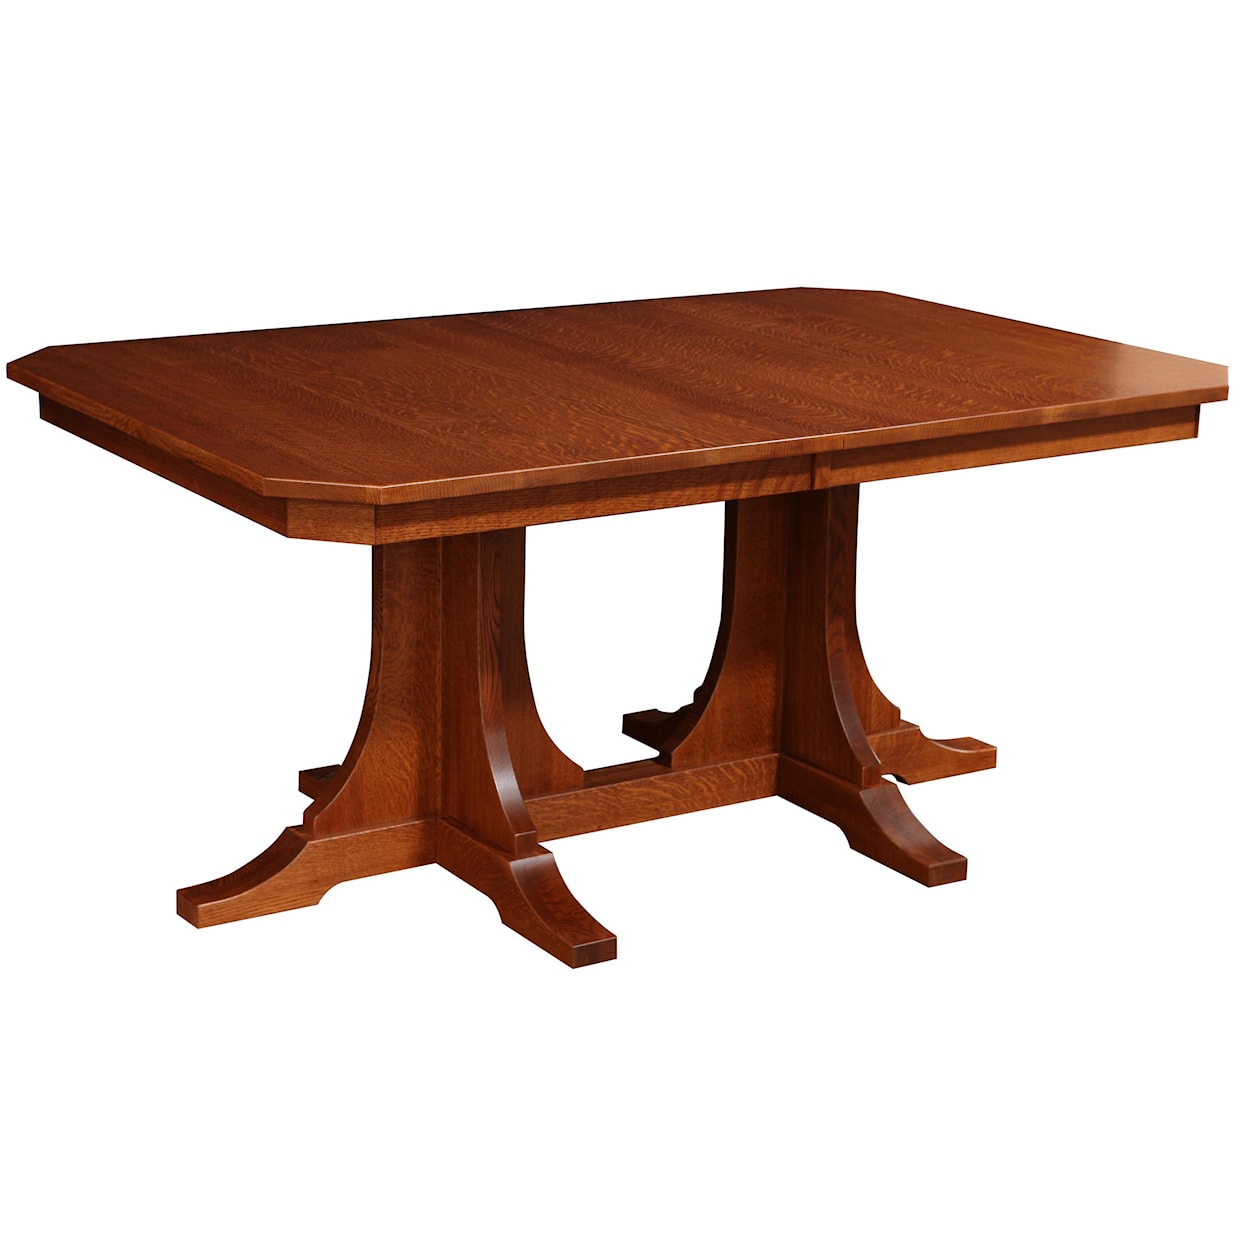 Amish Dining Room Copper Canyon Rectangular Dining Table